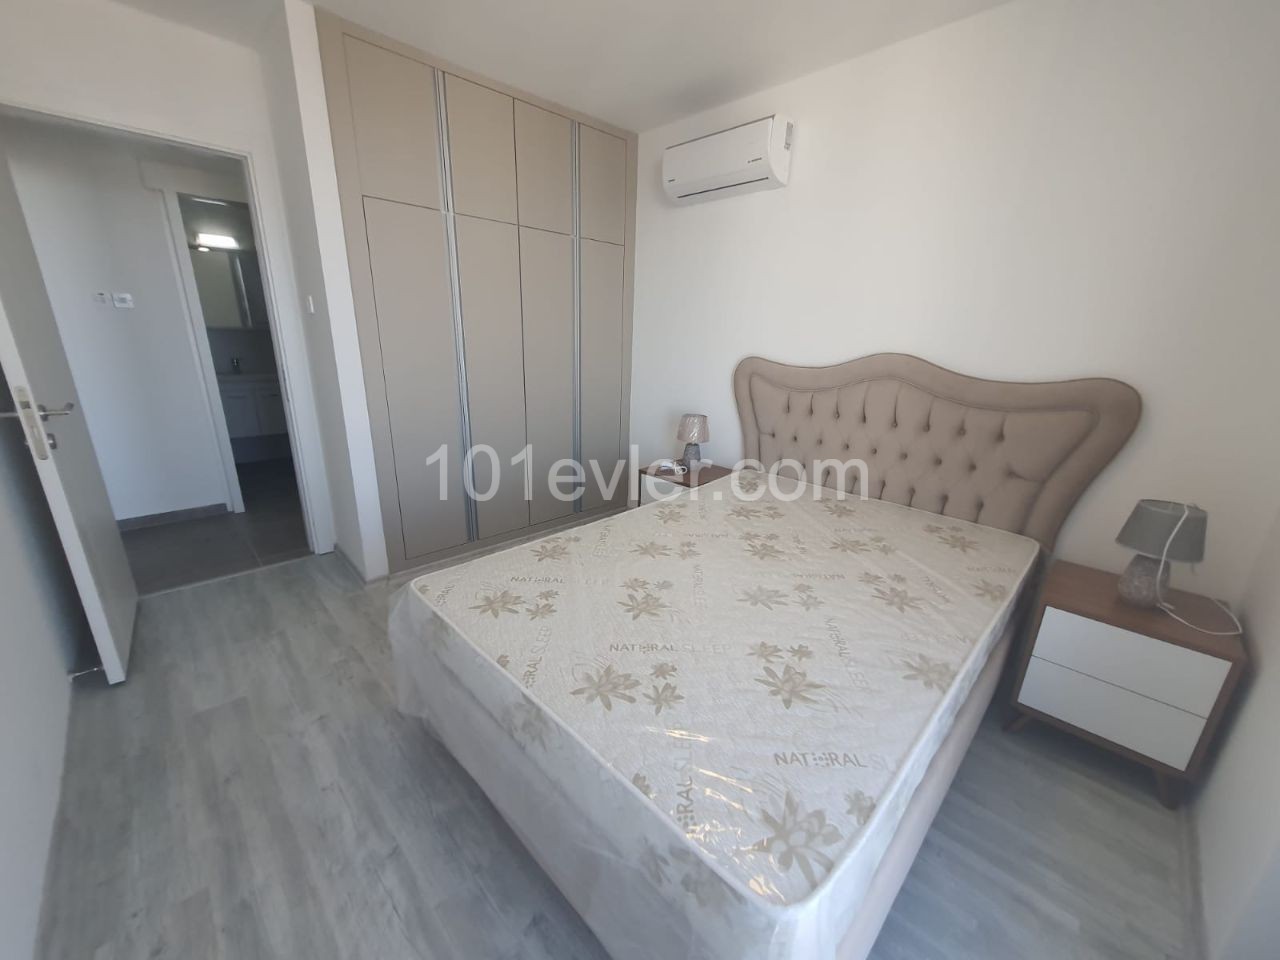 2 bedroom apartment for rent in Kyrenia Center / Fully furnished